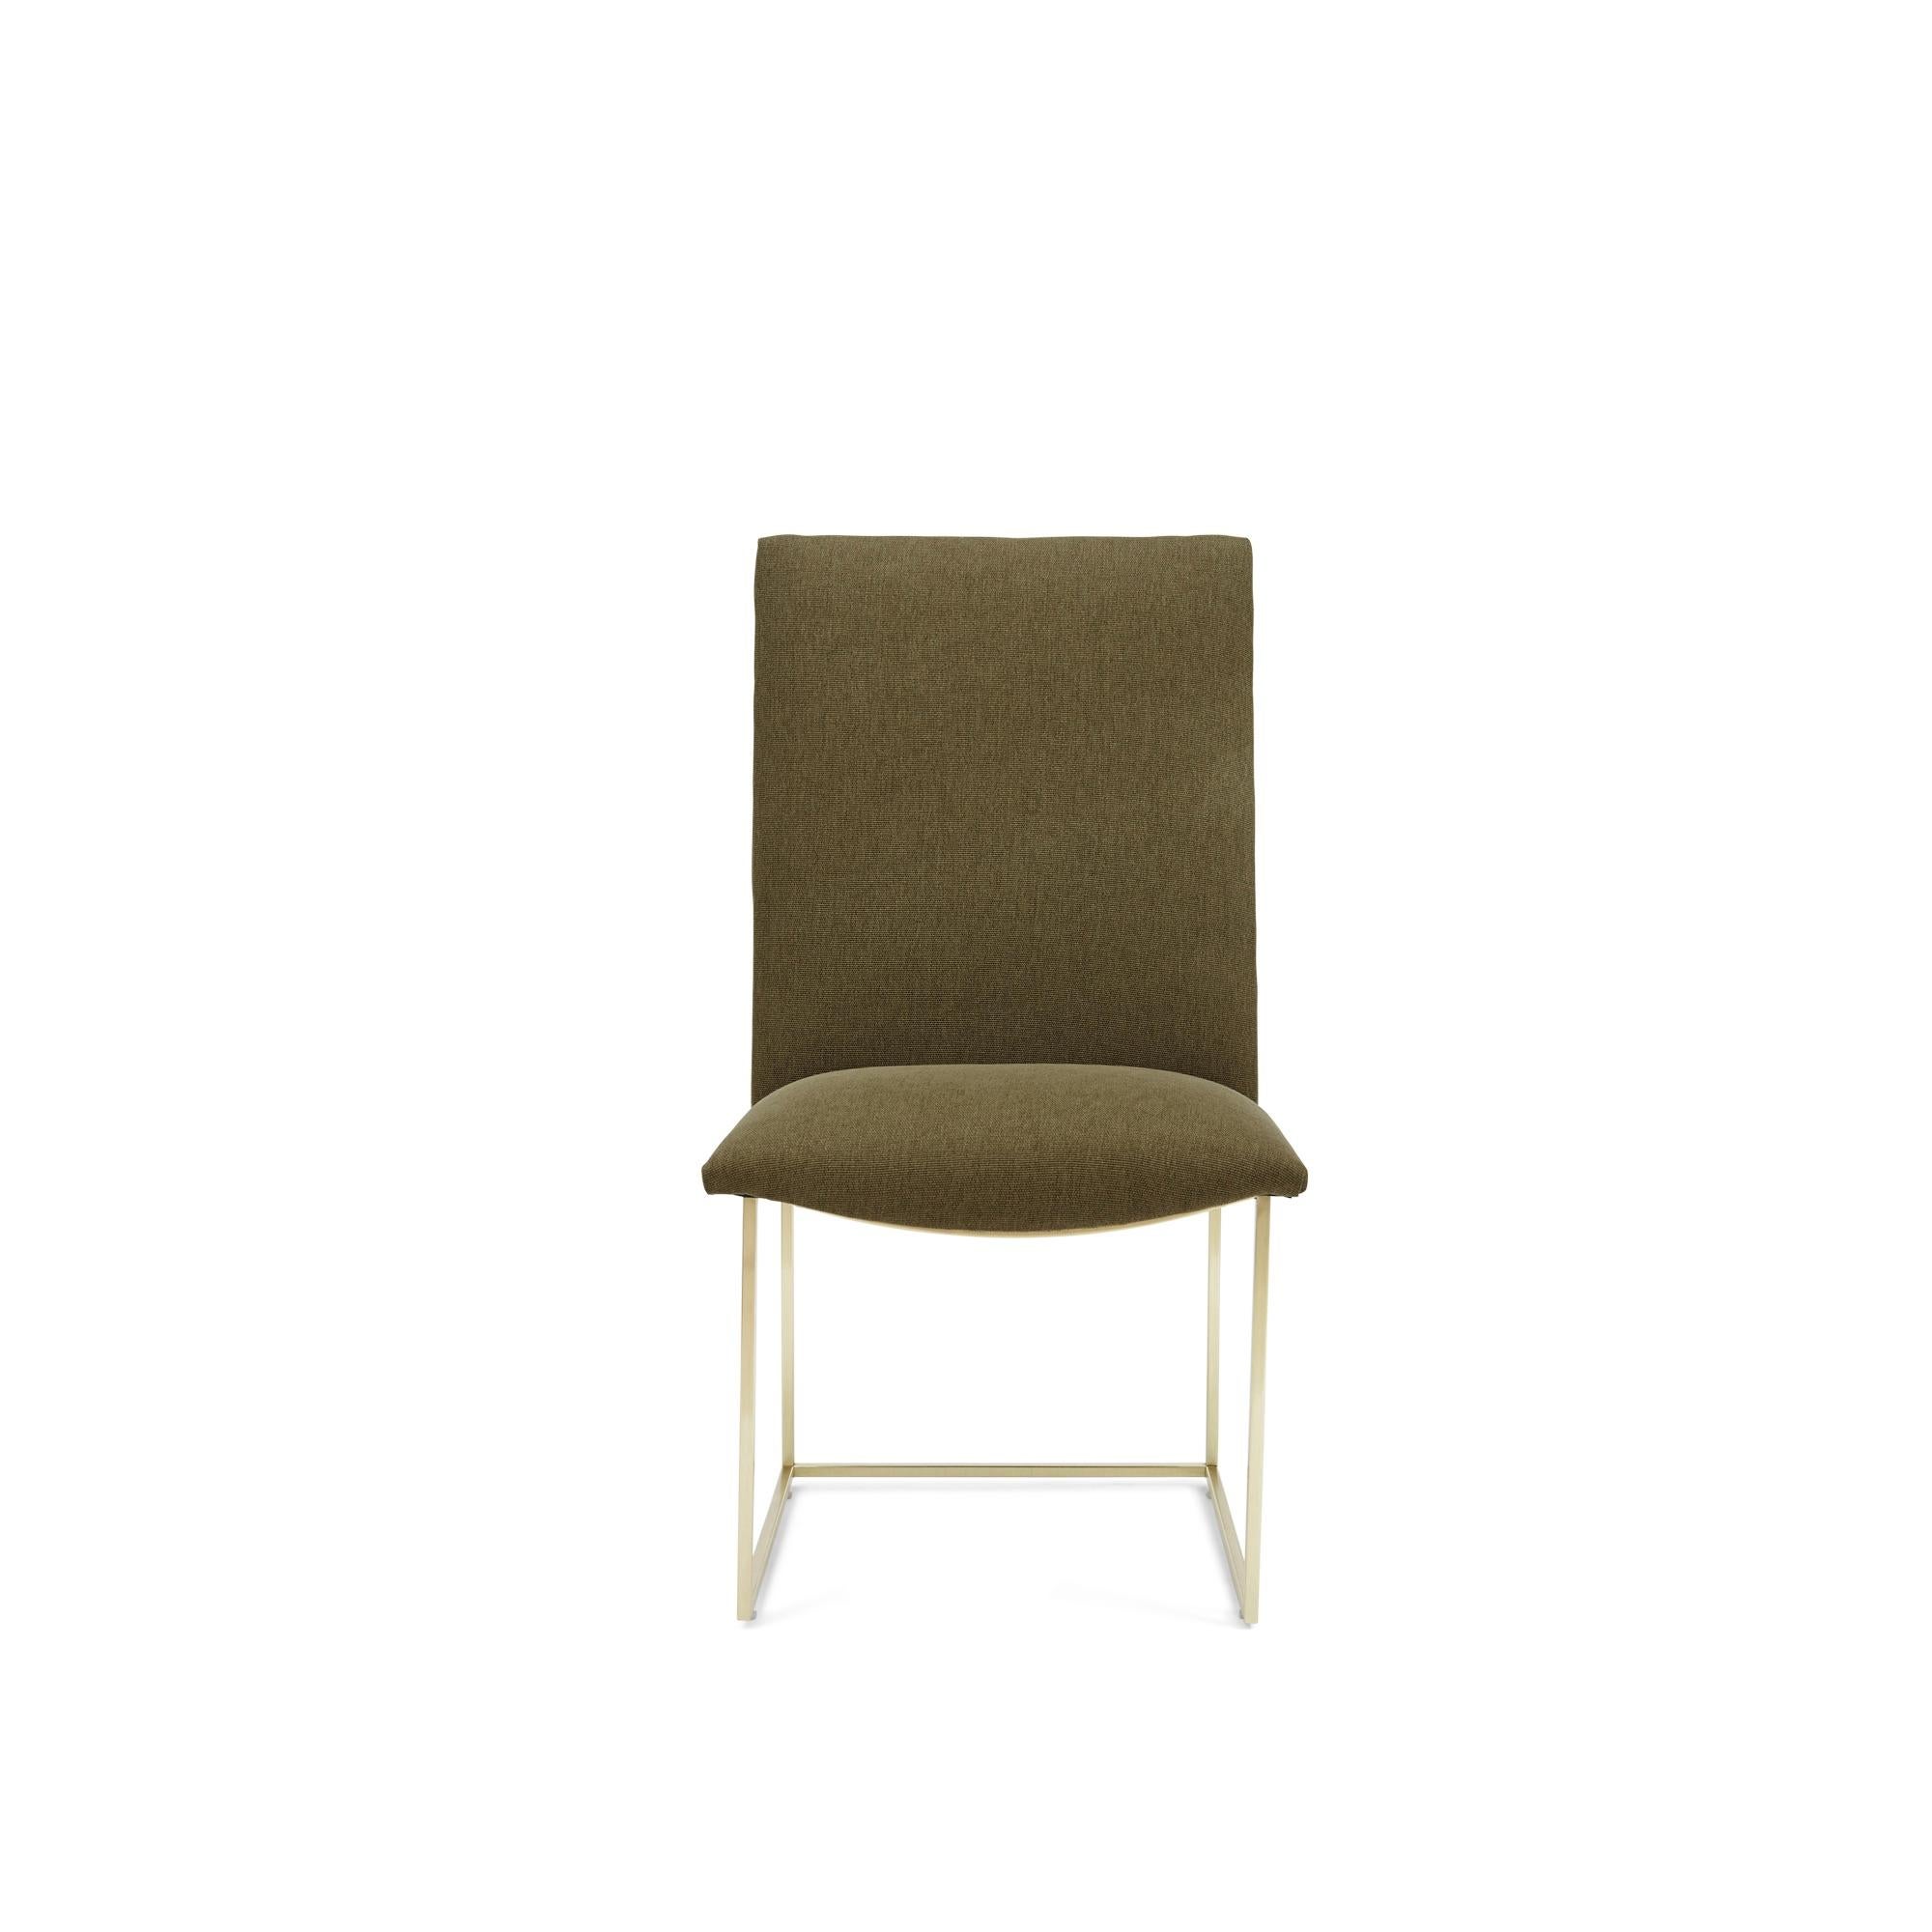 The thin frame dining chair features a high back and an armless silhouette that rest atop a thin metal base. 

The Lawson-Fenning Collection is designed and handmade in Los Angeles, California. Reach out to discover what options are currently in